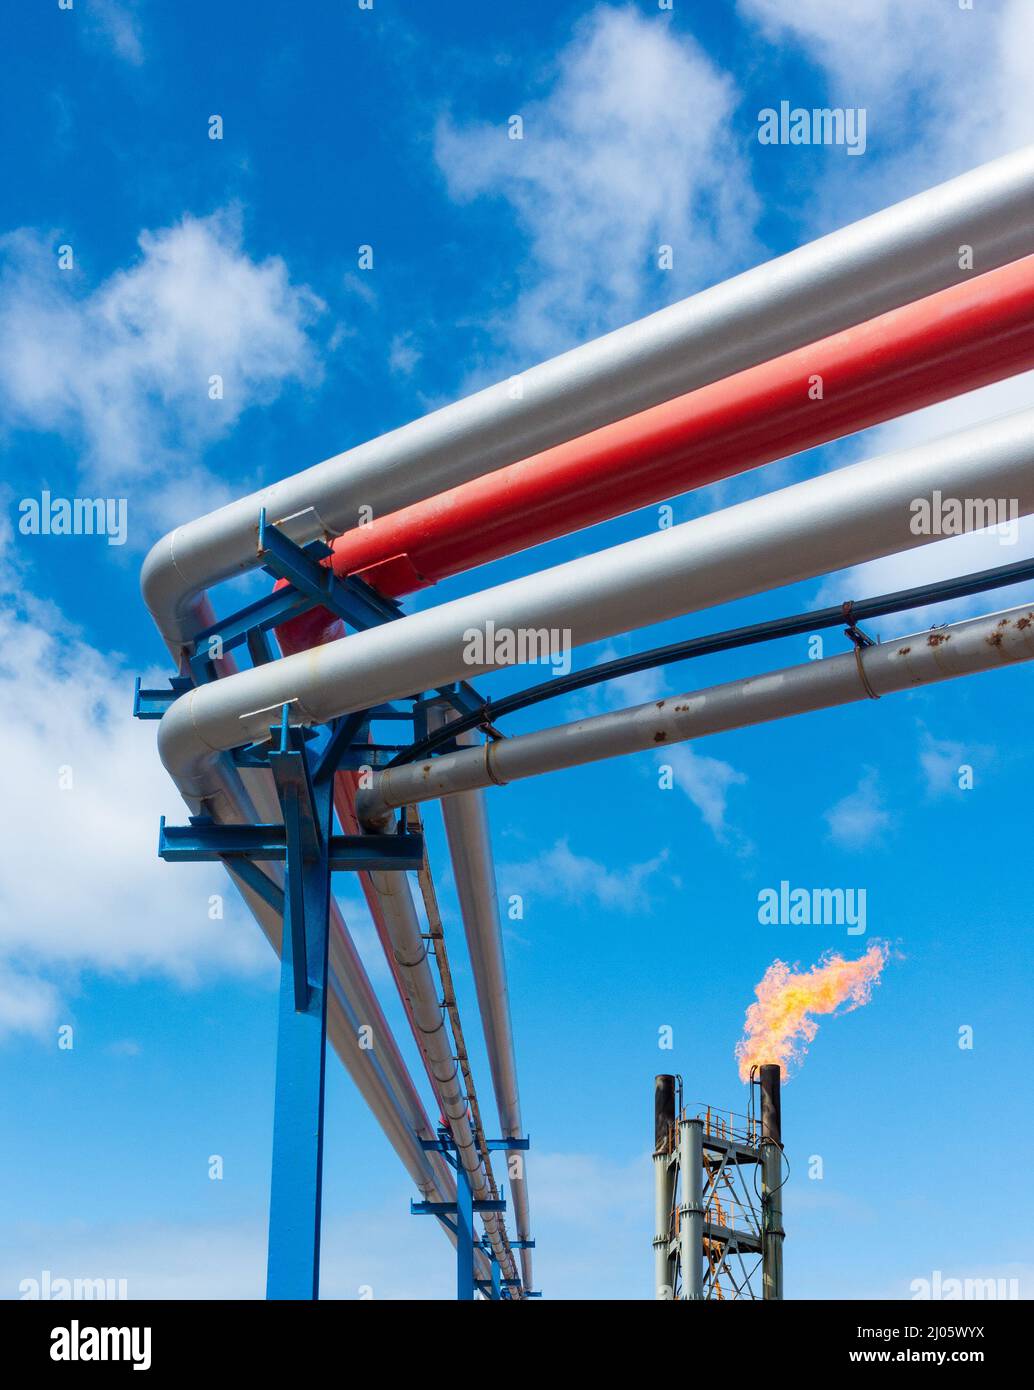 Gas, fuel pipeline. Concept image: rising gas, crude oil prices, energy crisis, Russian sanctions, UK, Europe gas supply, refinery.. Stock Photo